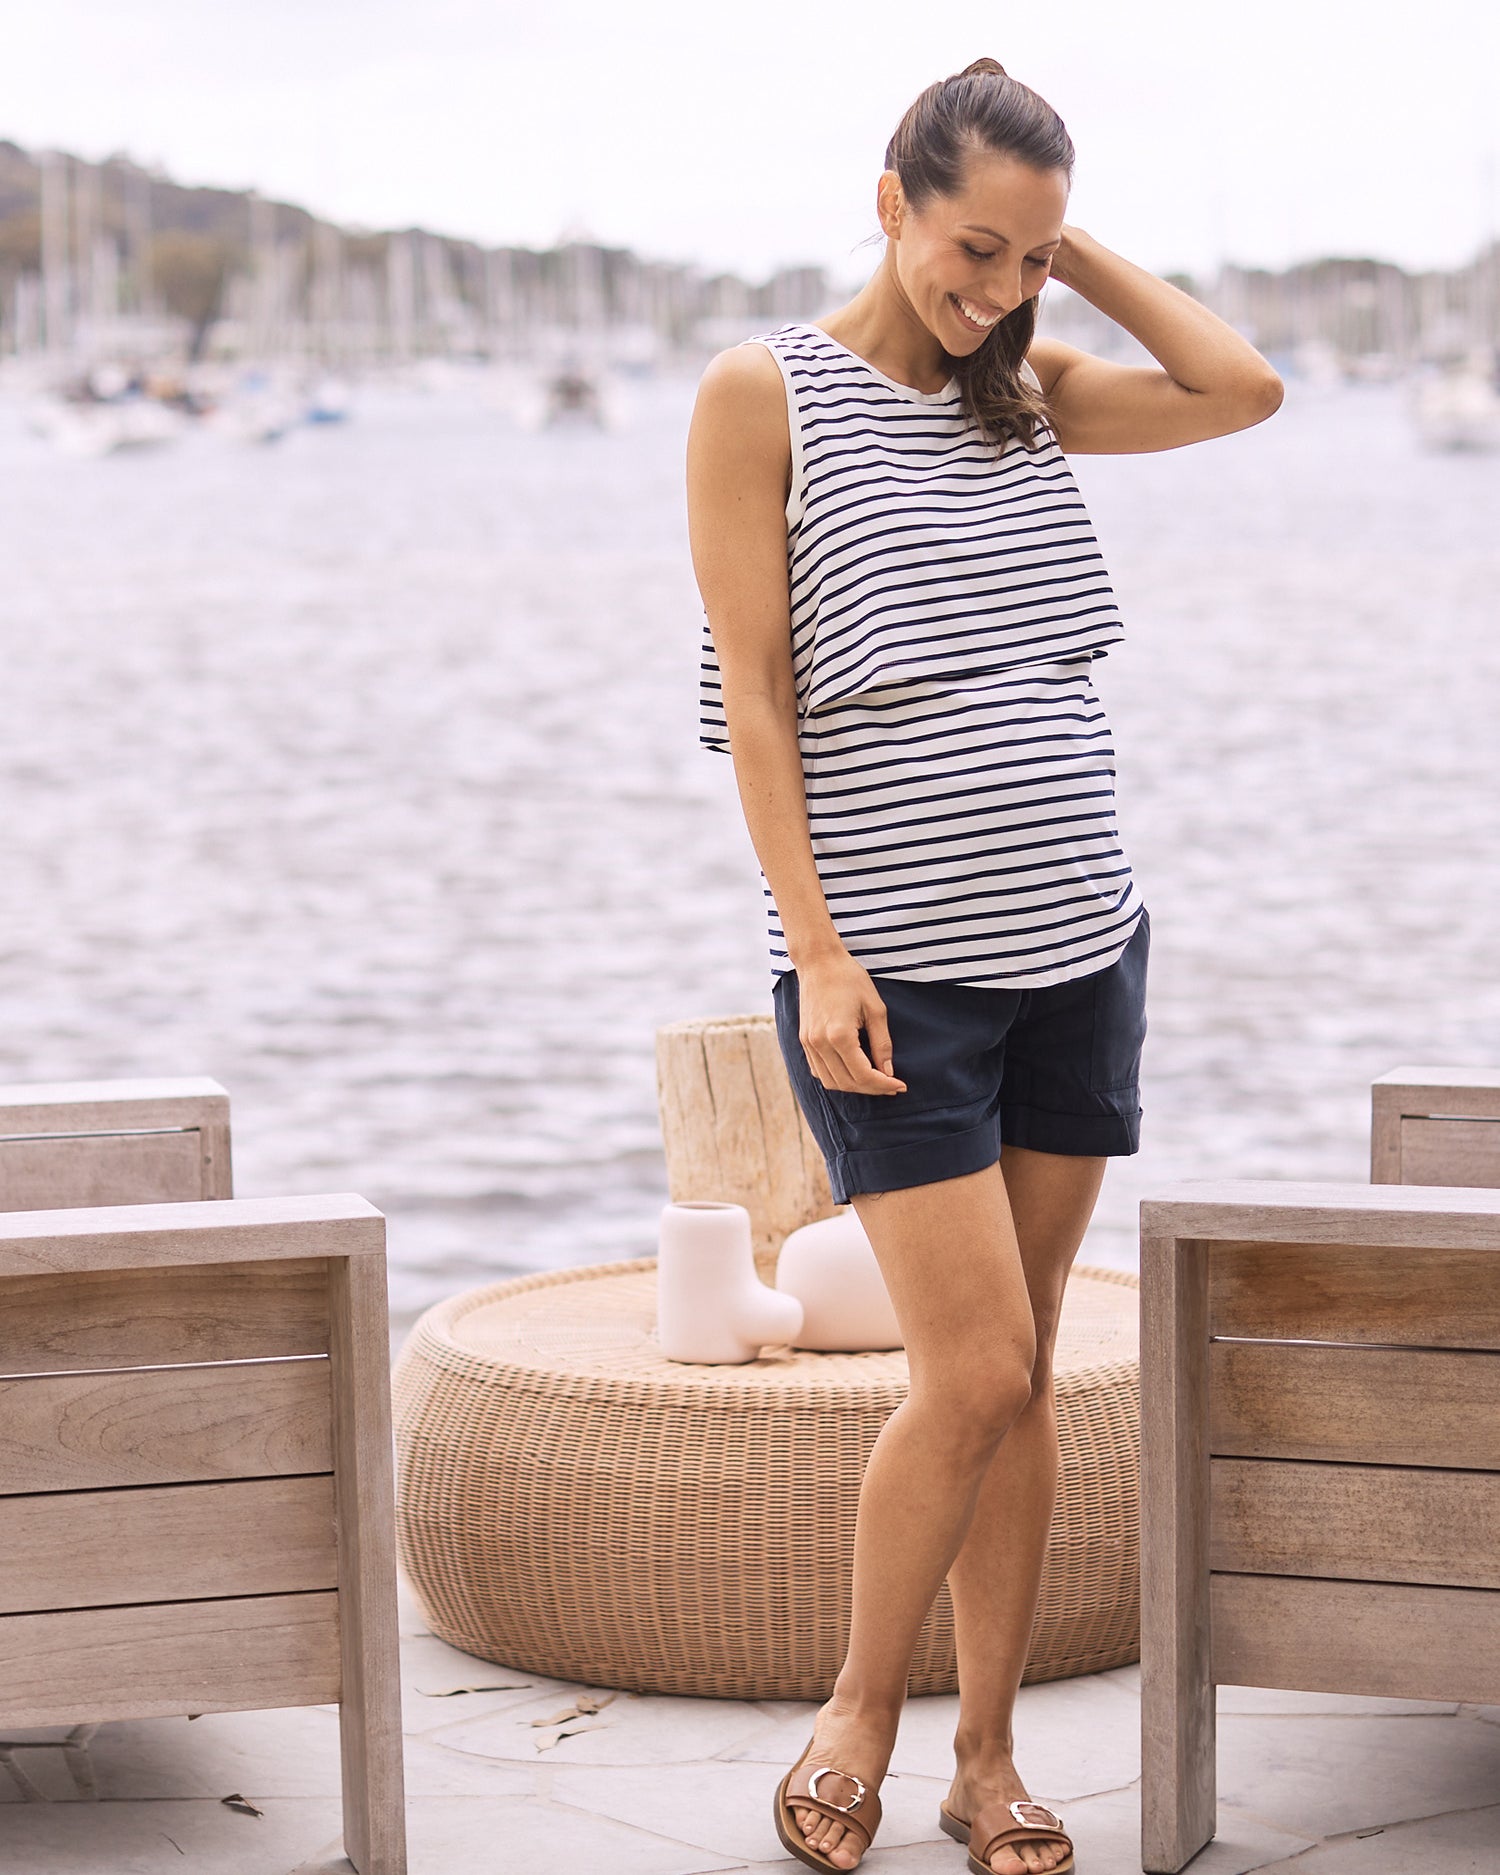 Maternity Shorts Australia: Comfort and Style for Pregnant Women